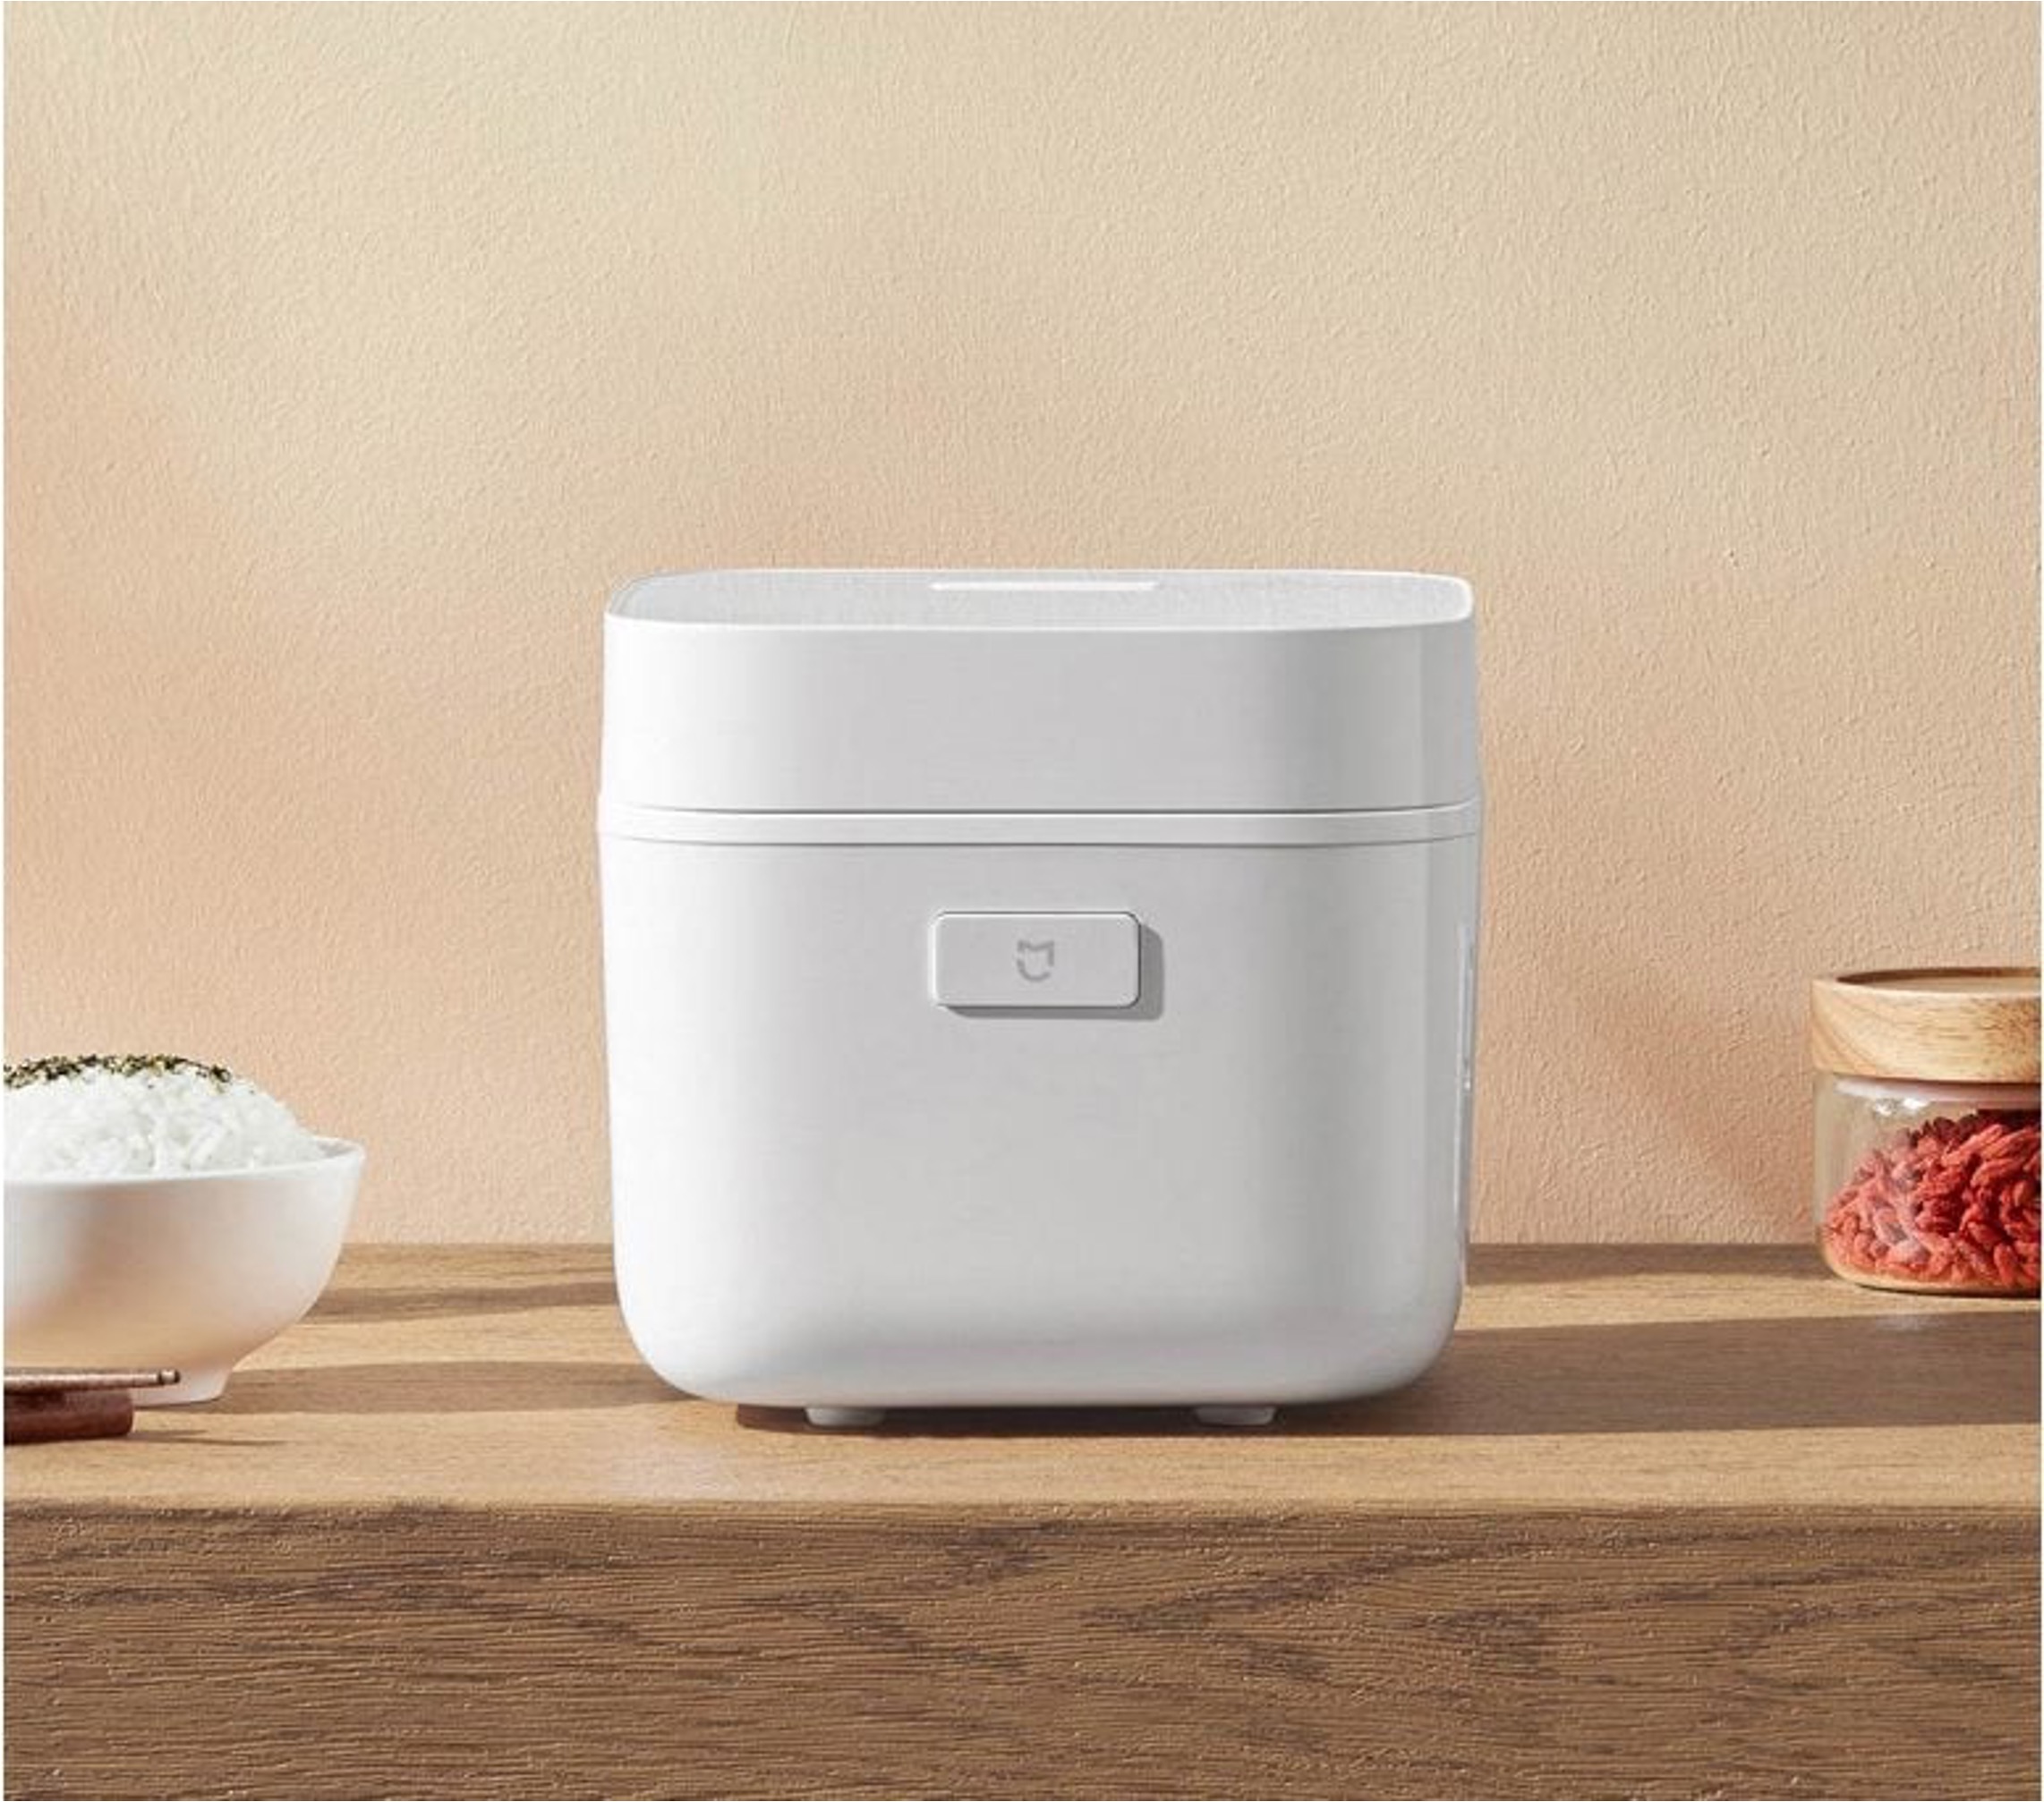 Operating Xiaomi Rice Cooker 2